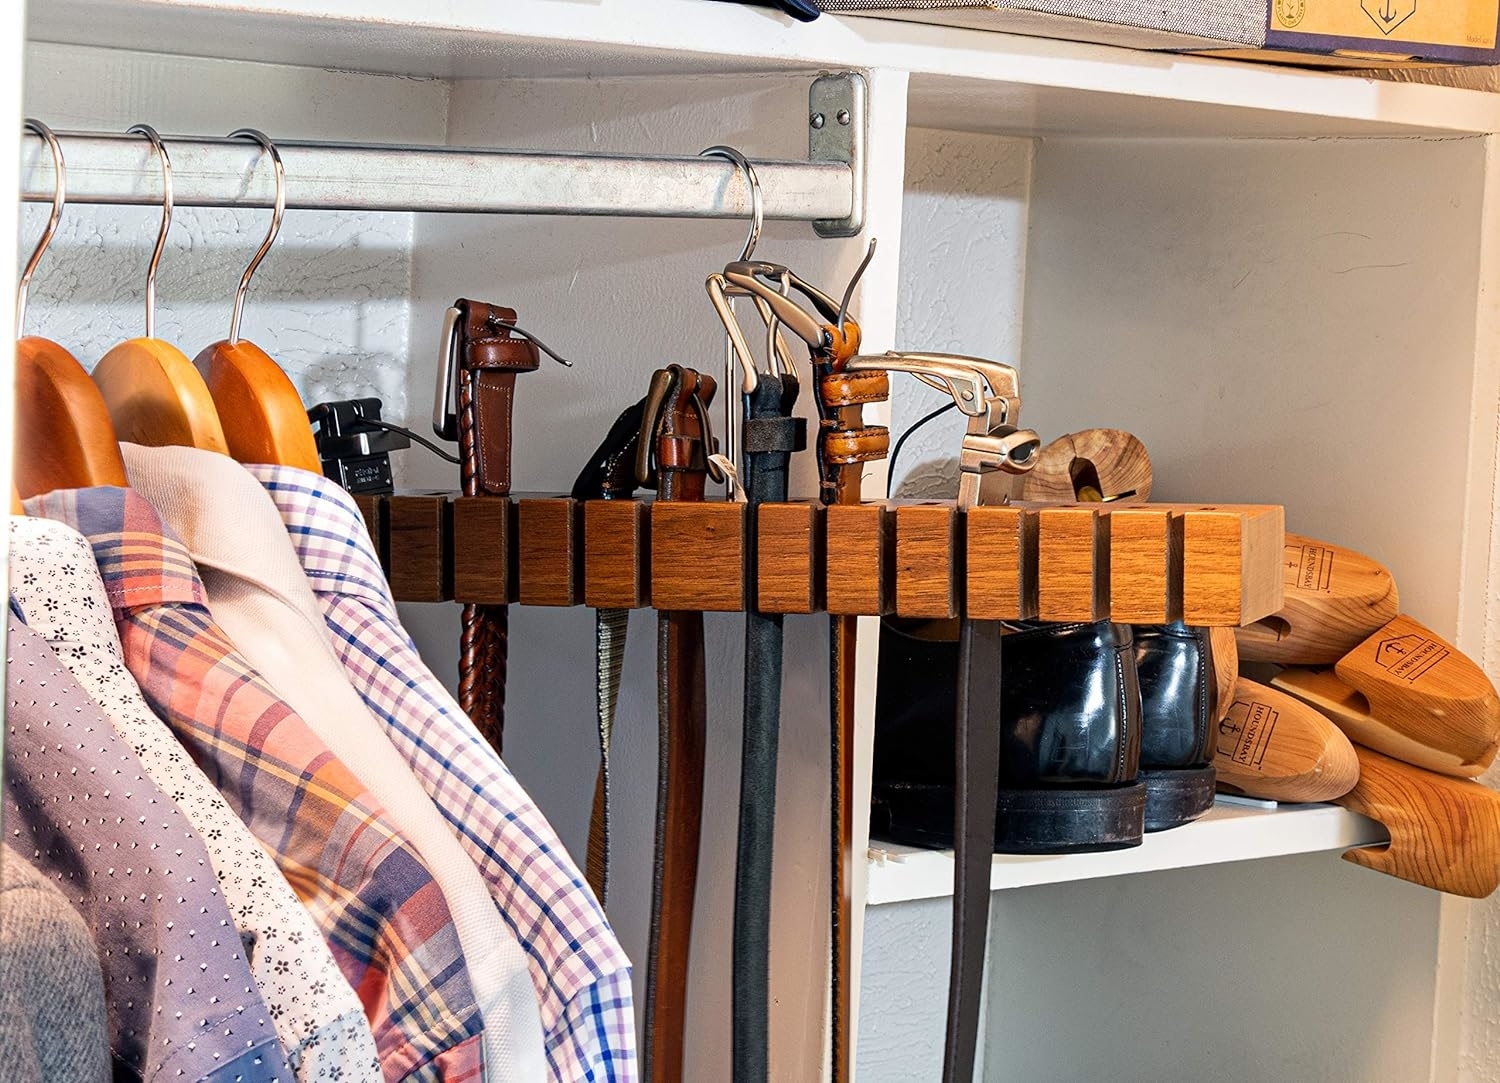 Closet organizer with shirts on hangers, wooden shoe racks with shoes, and belts hanging above